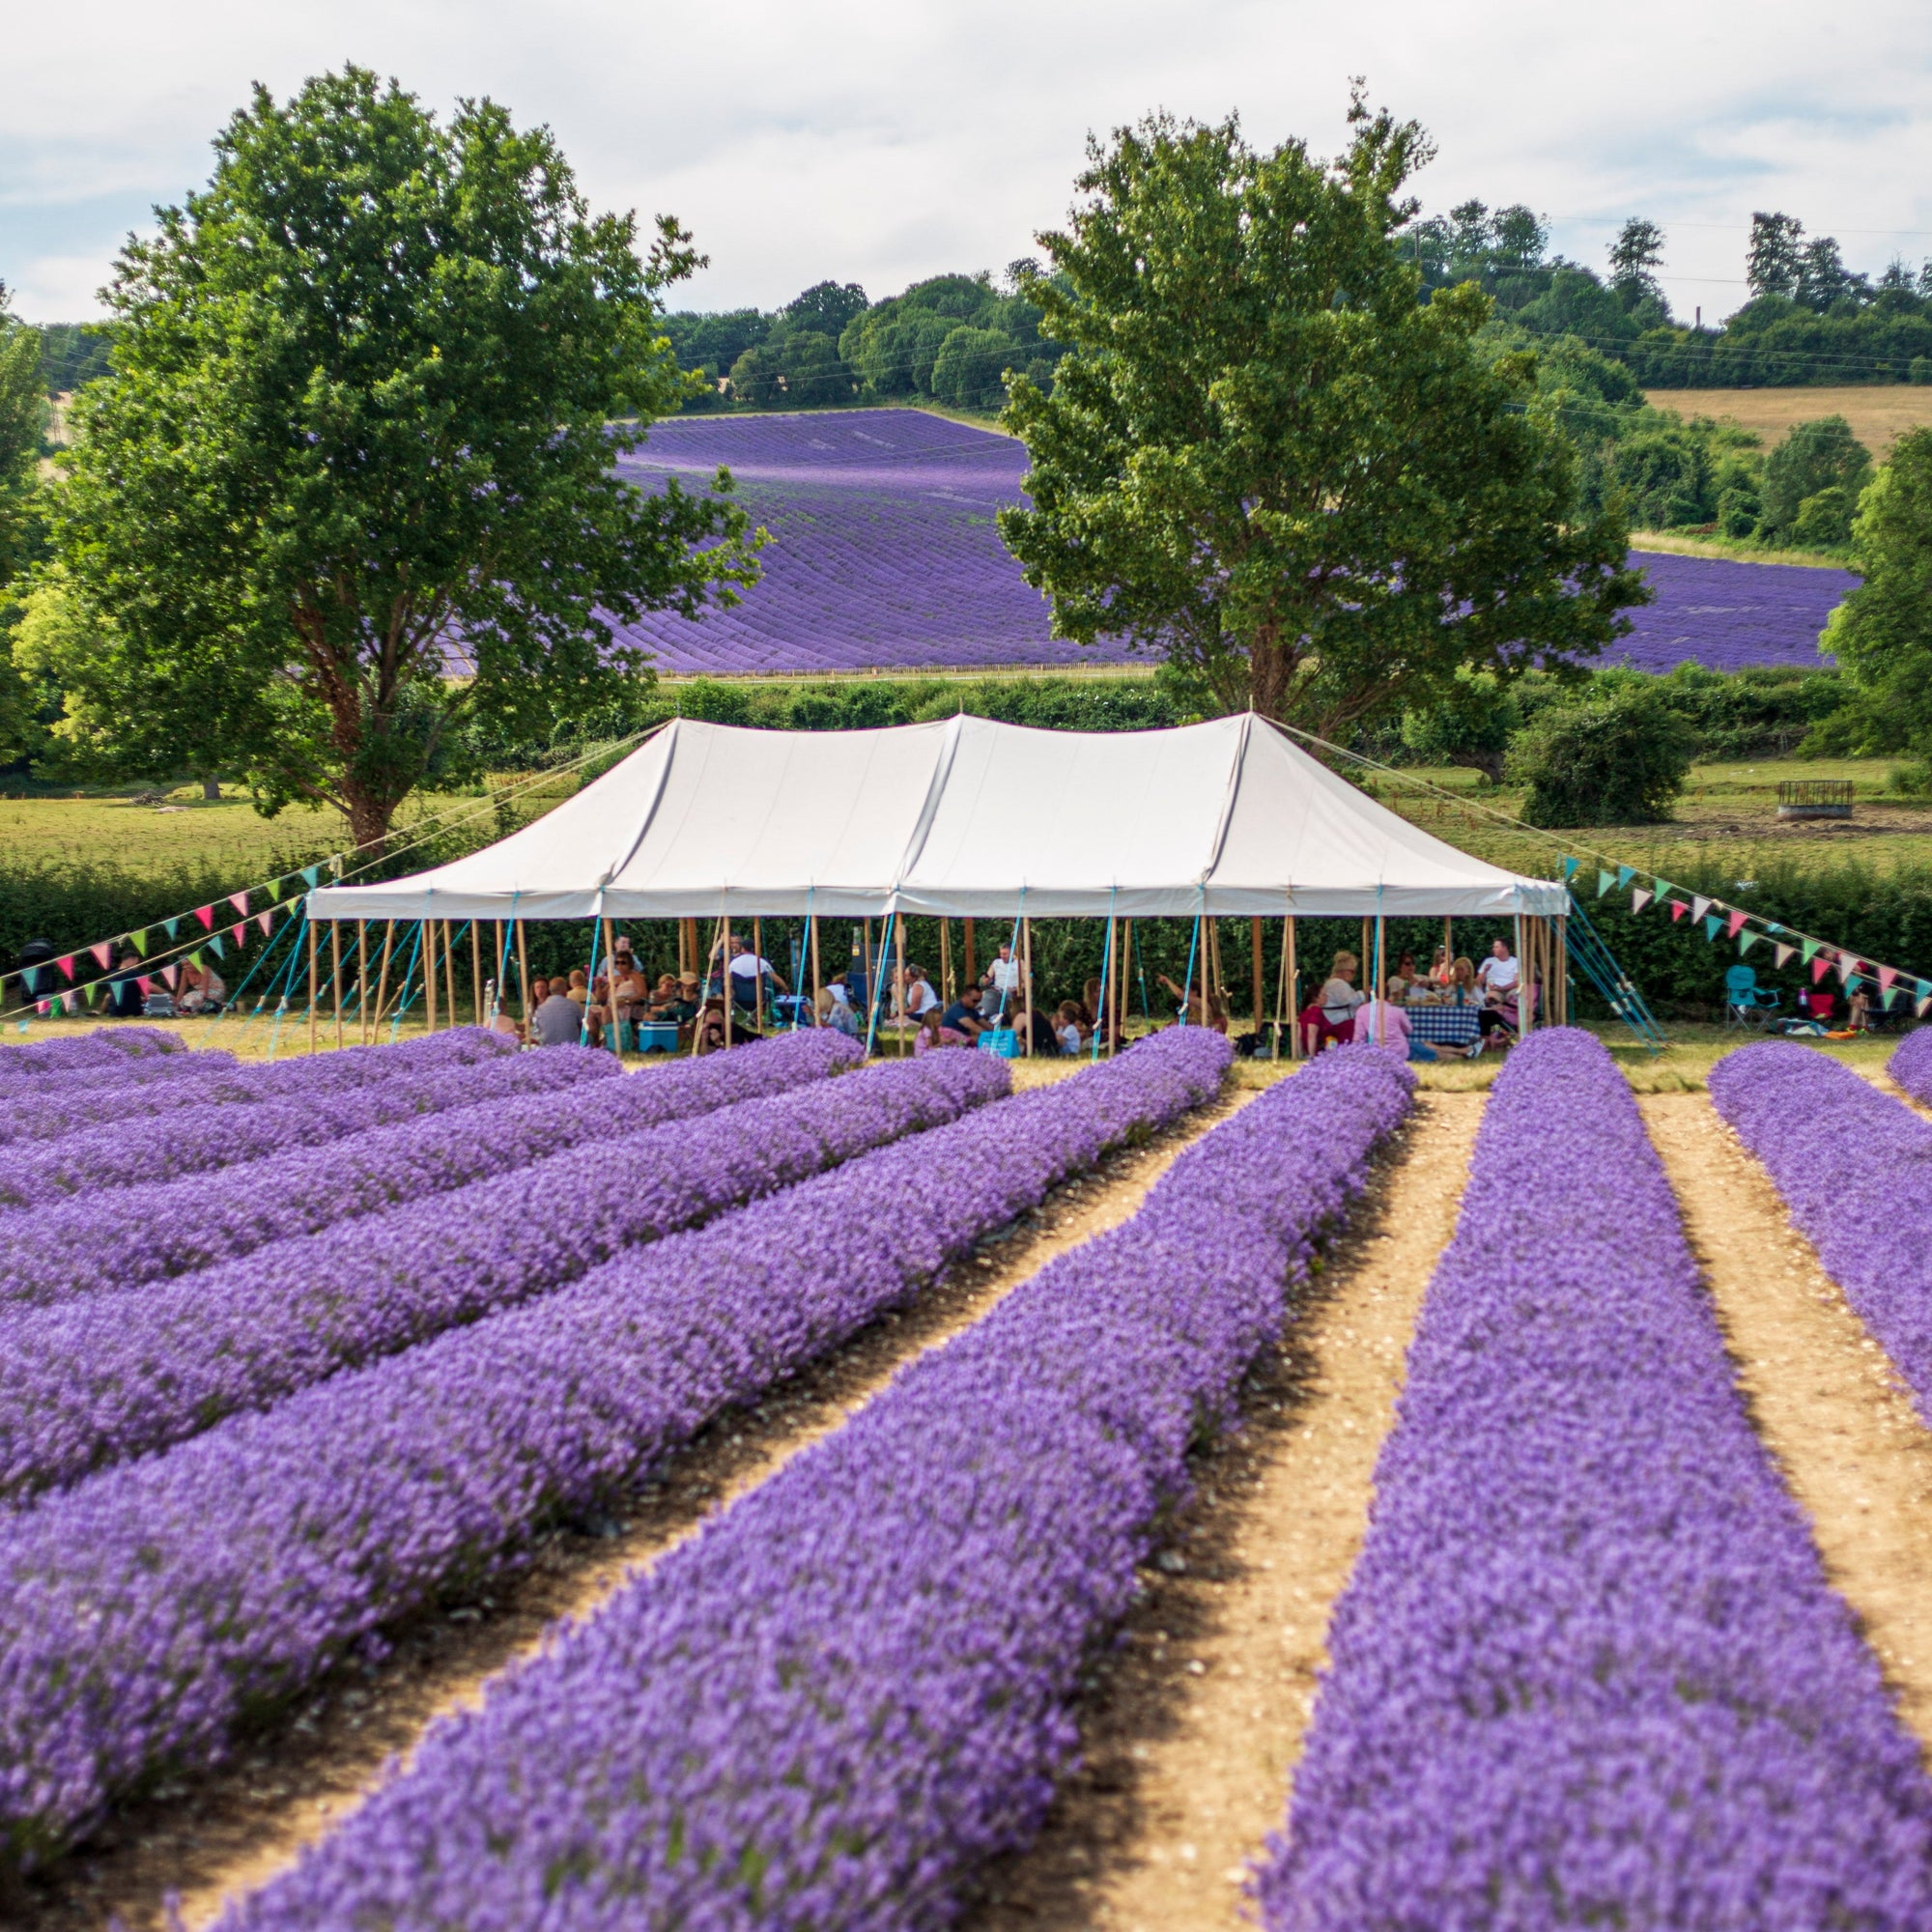 LAVENDER GIN PICNIC EXPERIENCE TICKETS FOR 4 ADULTS